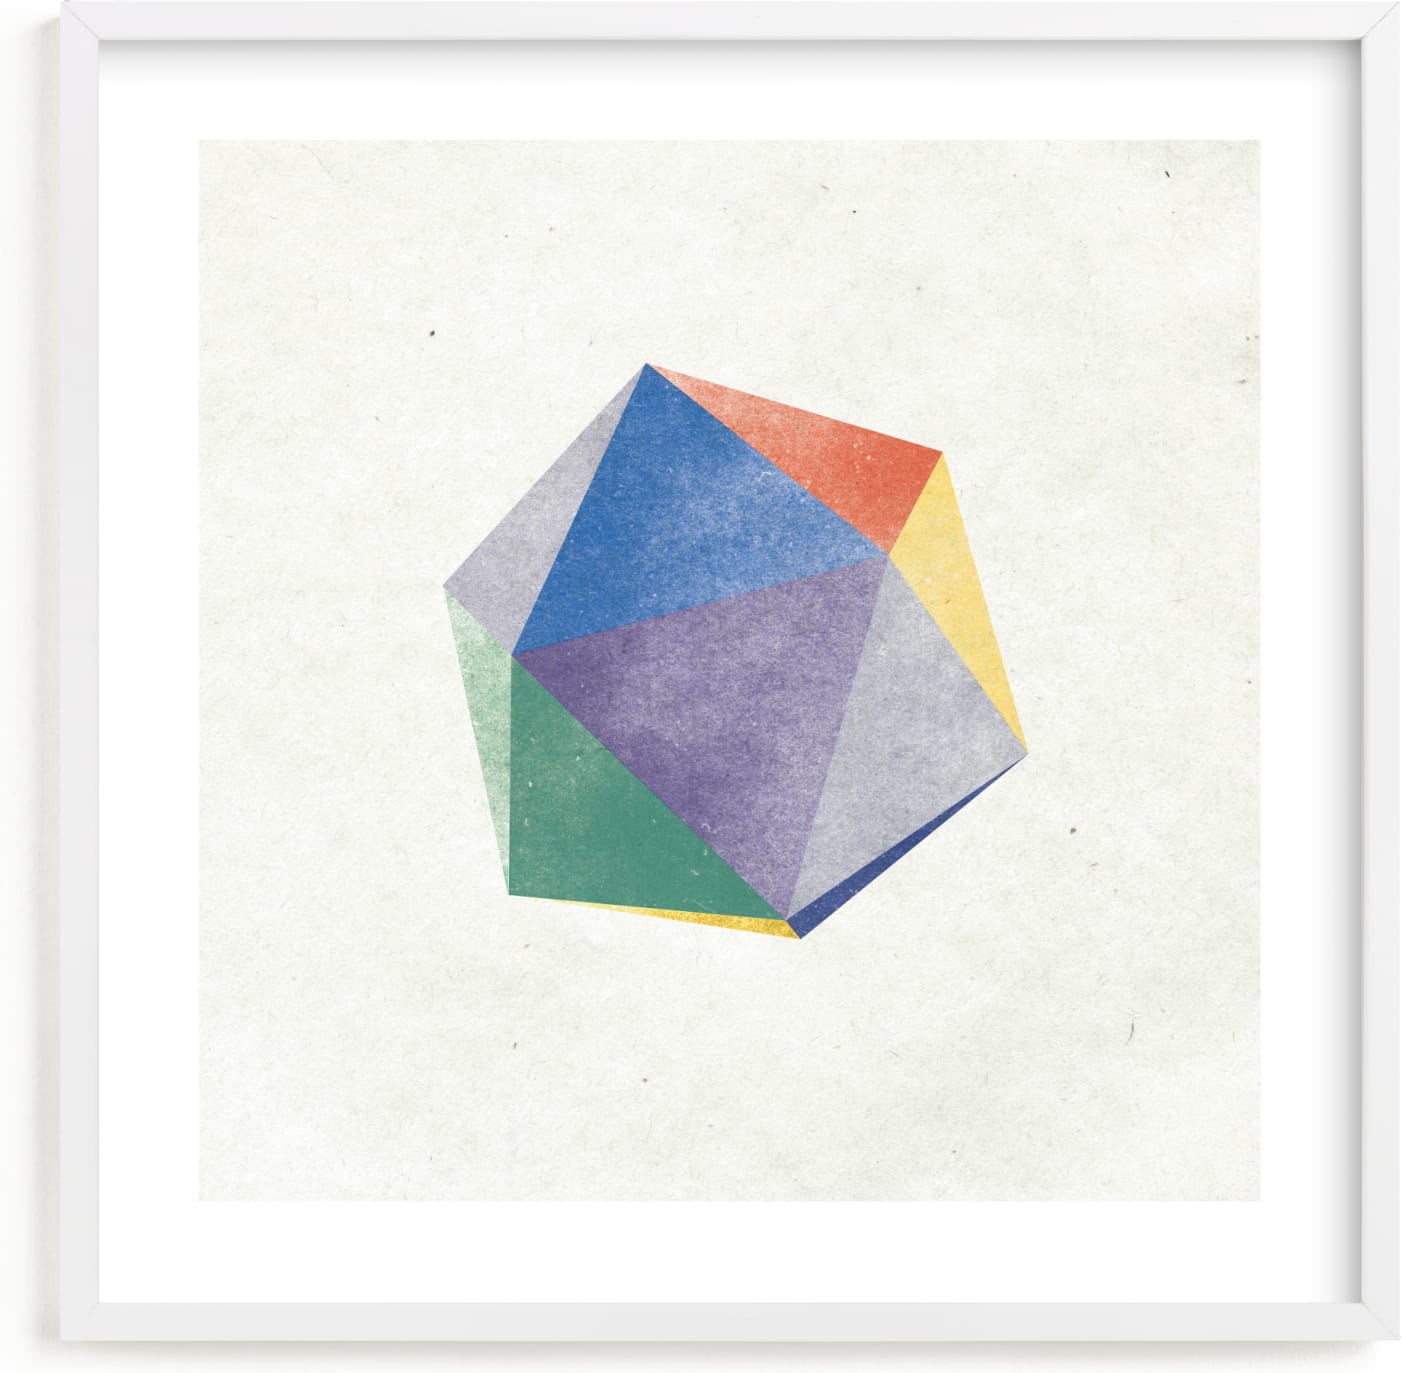 This is a colorful kids wall art by Sumak Studio called dreamy icosahedron.